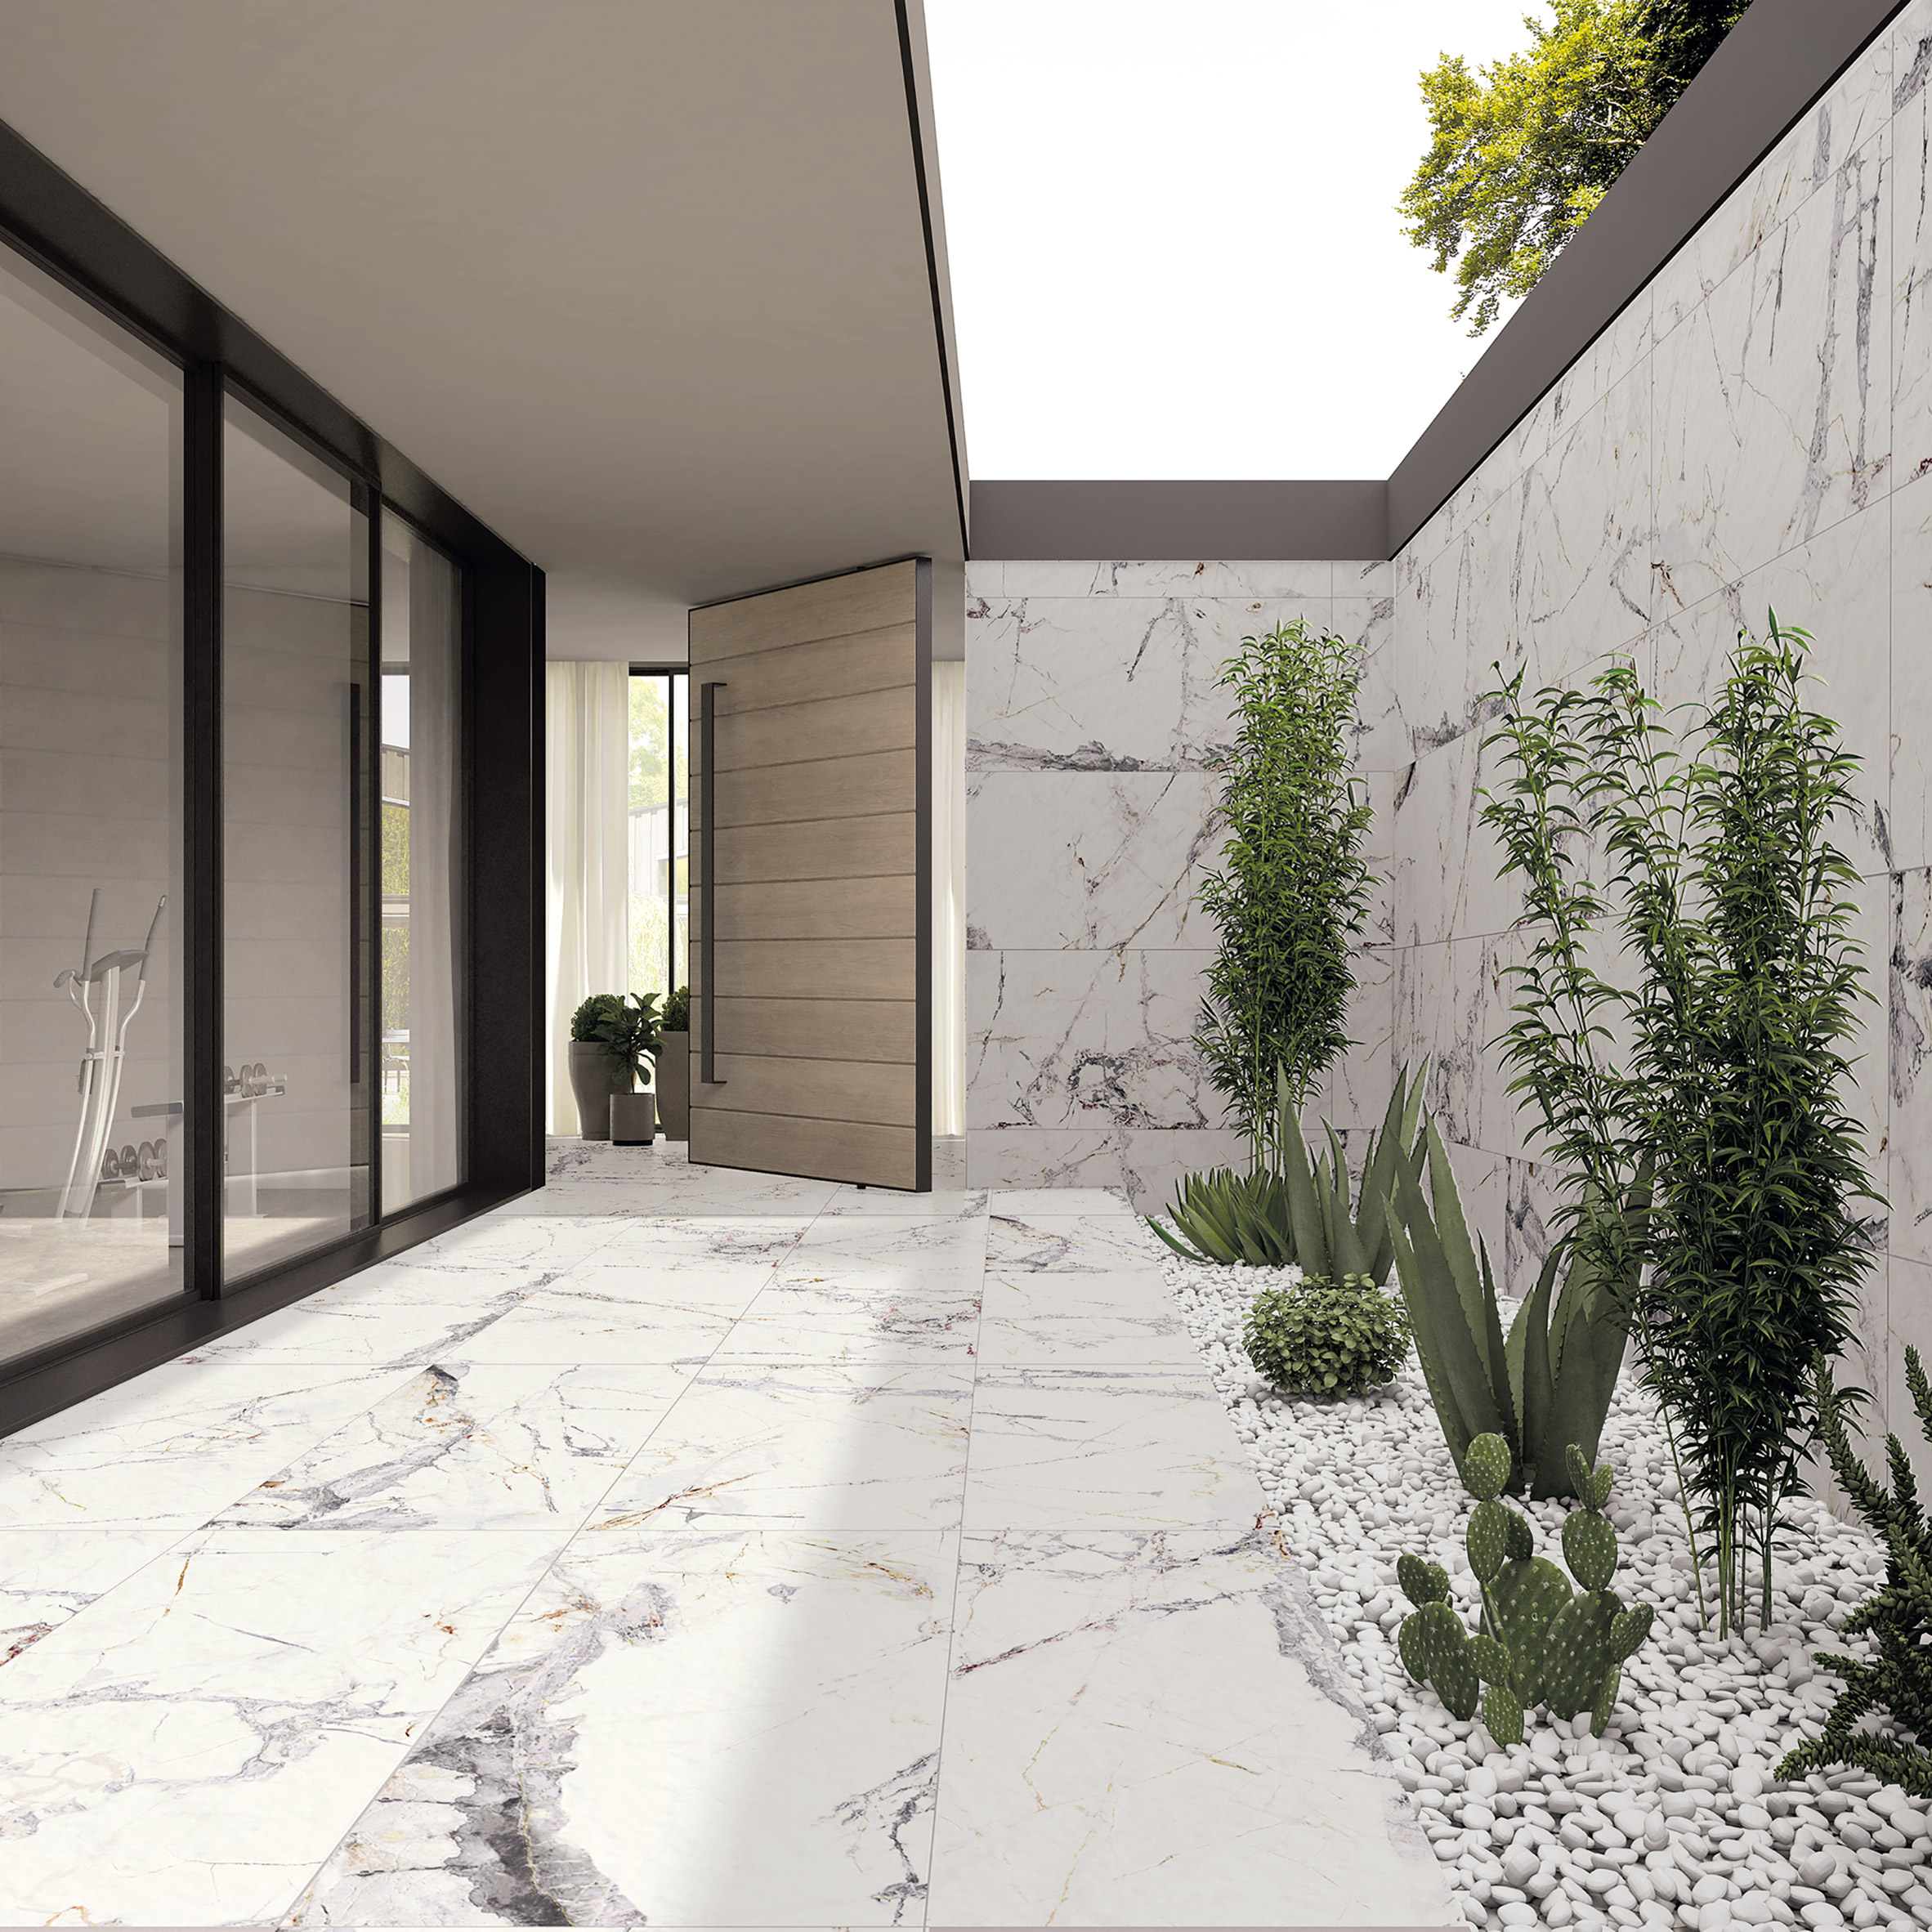 Allure tiles used on the floor and walls of an outdoor terrace